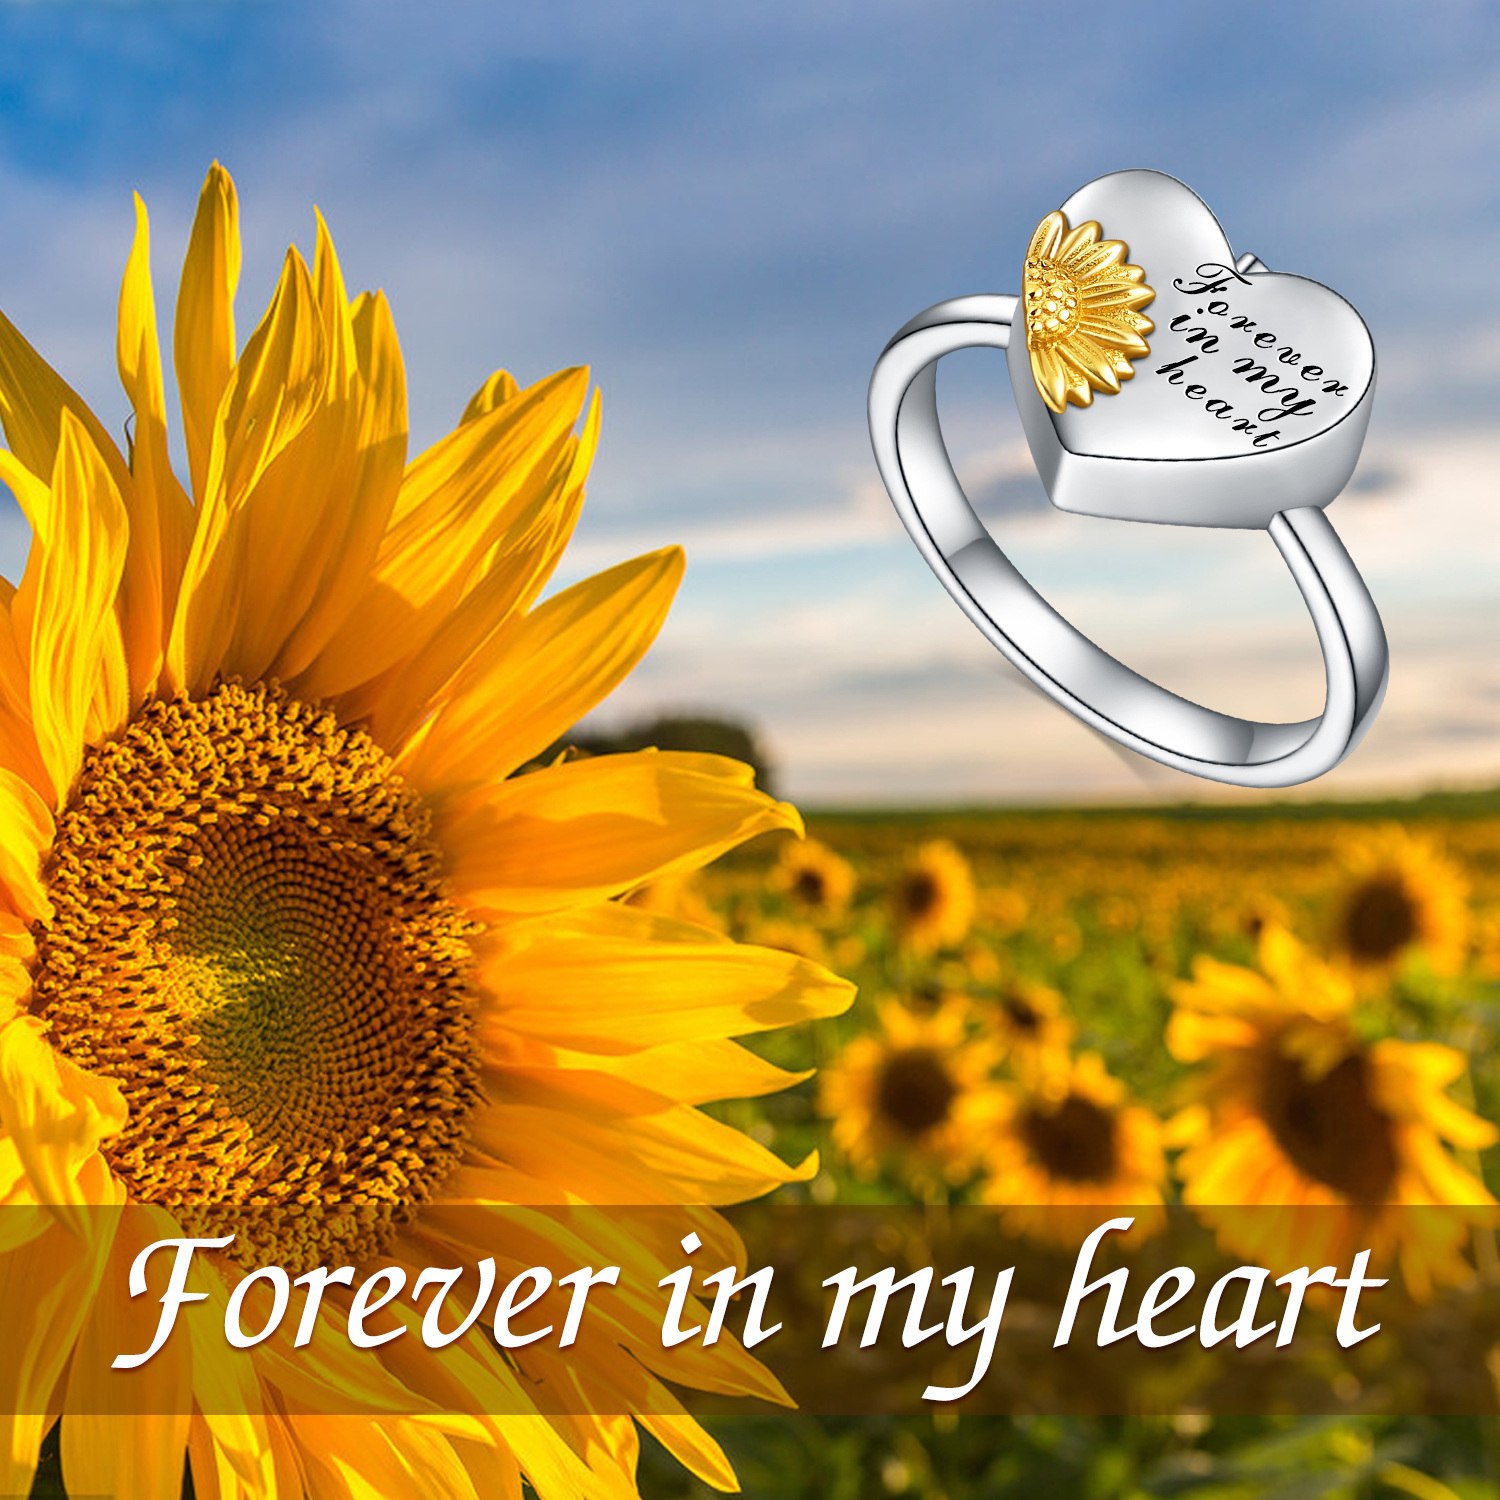 84d6d5ac594cfd642a636370866fa1c1PYJ0455 75 - Sterling Silver Wing Sunflower Cremation Urn  Holds Loved Ones Ashes Always in My Heart Ring for Ashes for Women